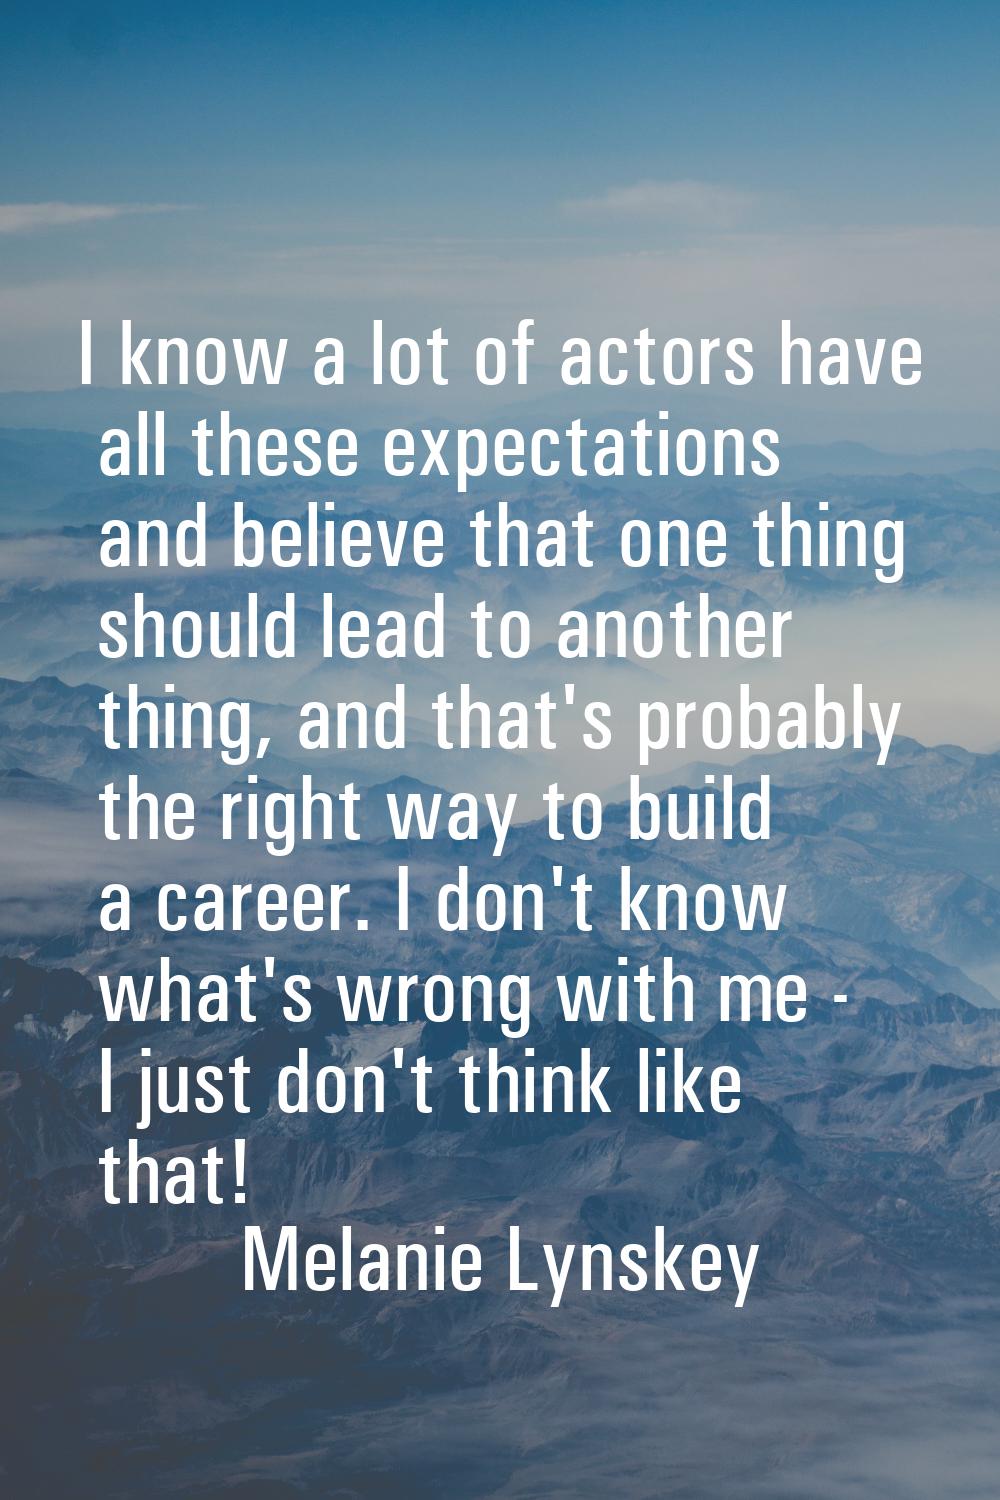 I know a lot of actors have all these expectations and believe that one thing should lead to anothe